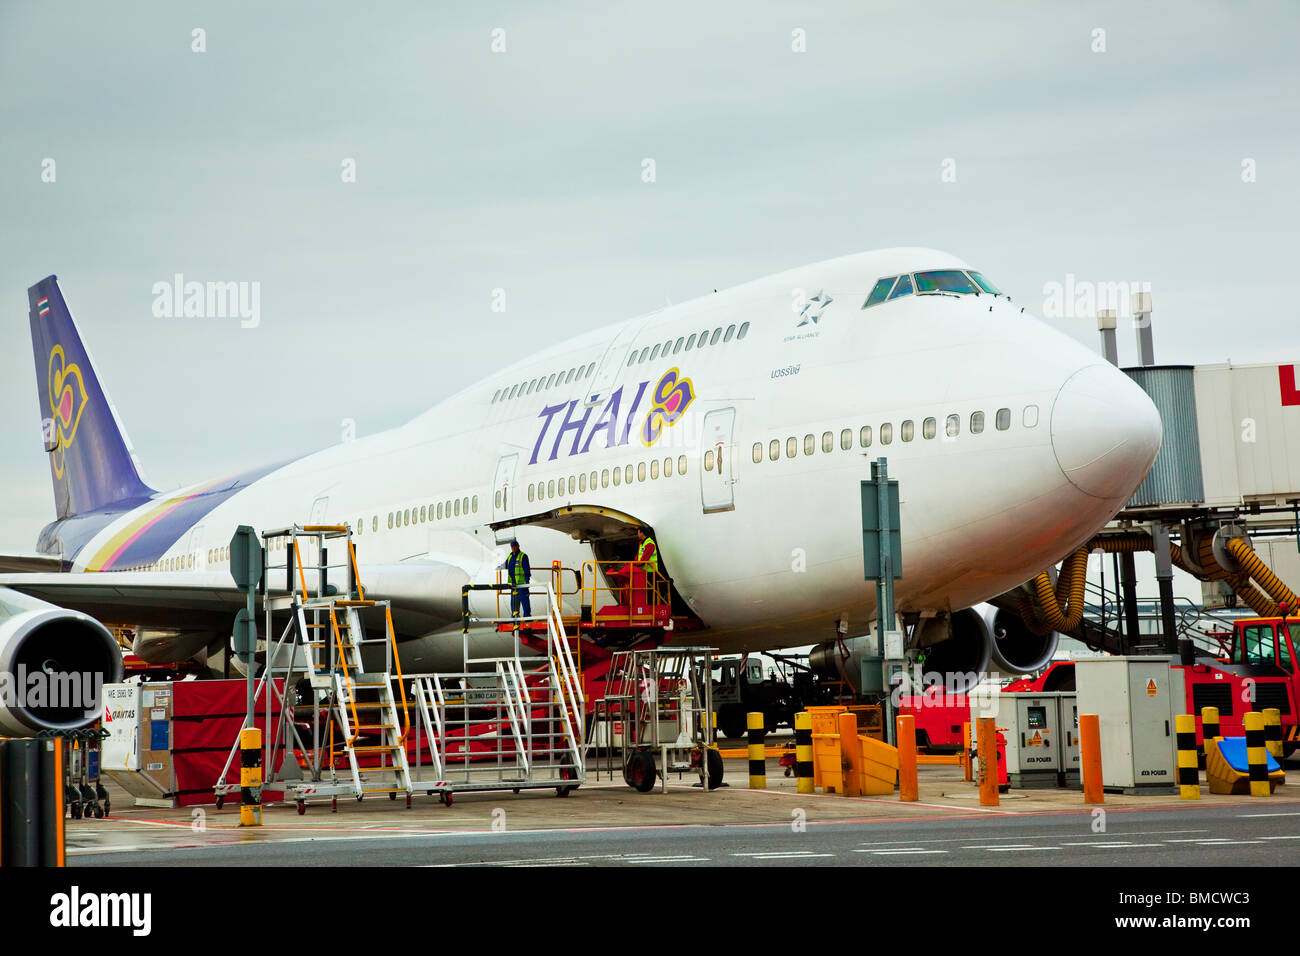 A Thai Airways Boeing 747-400 in the process of being loaded stands at a gate at Heathrow Airport London England Stock Photo